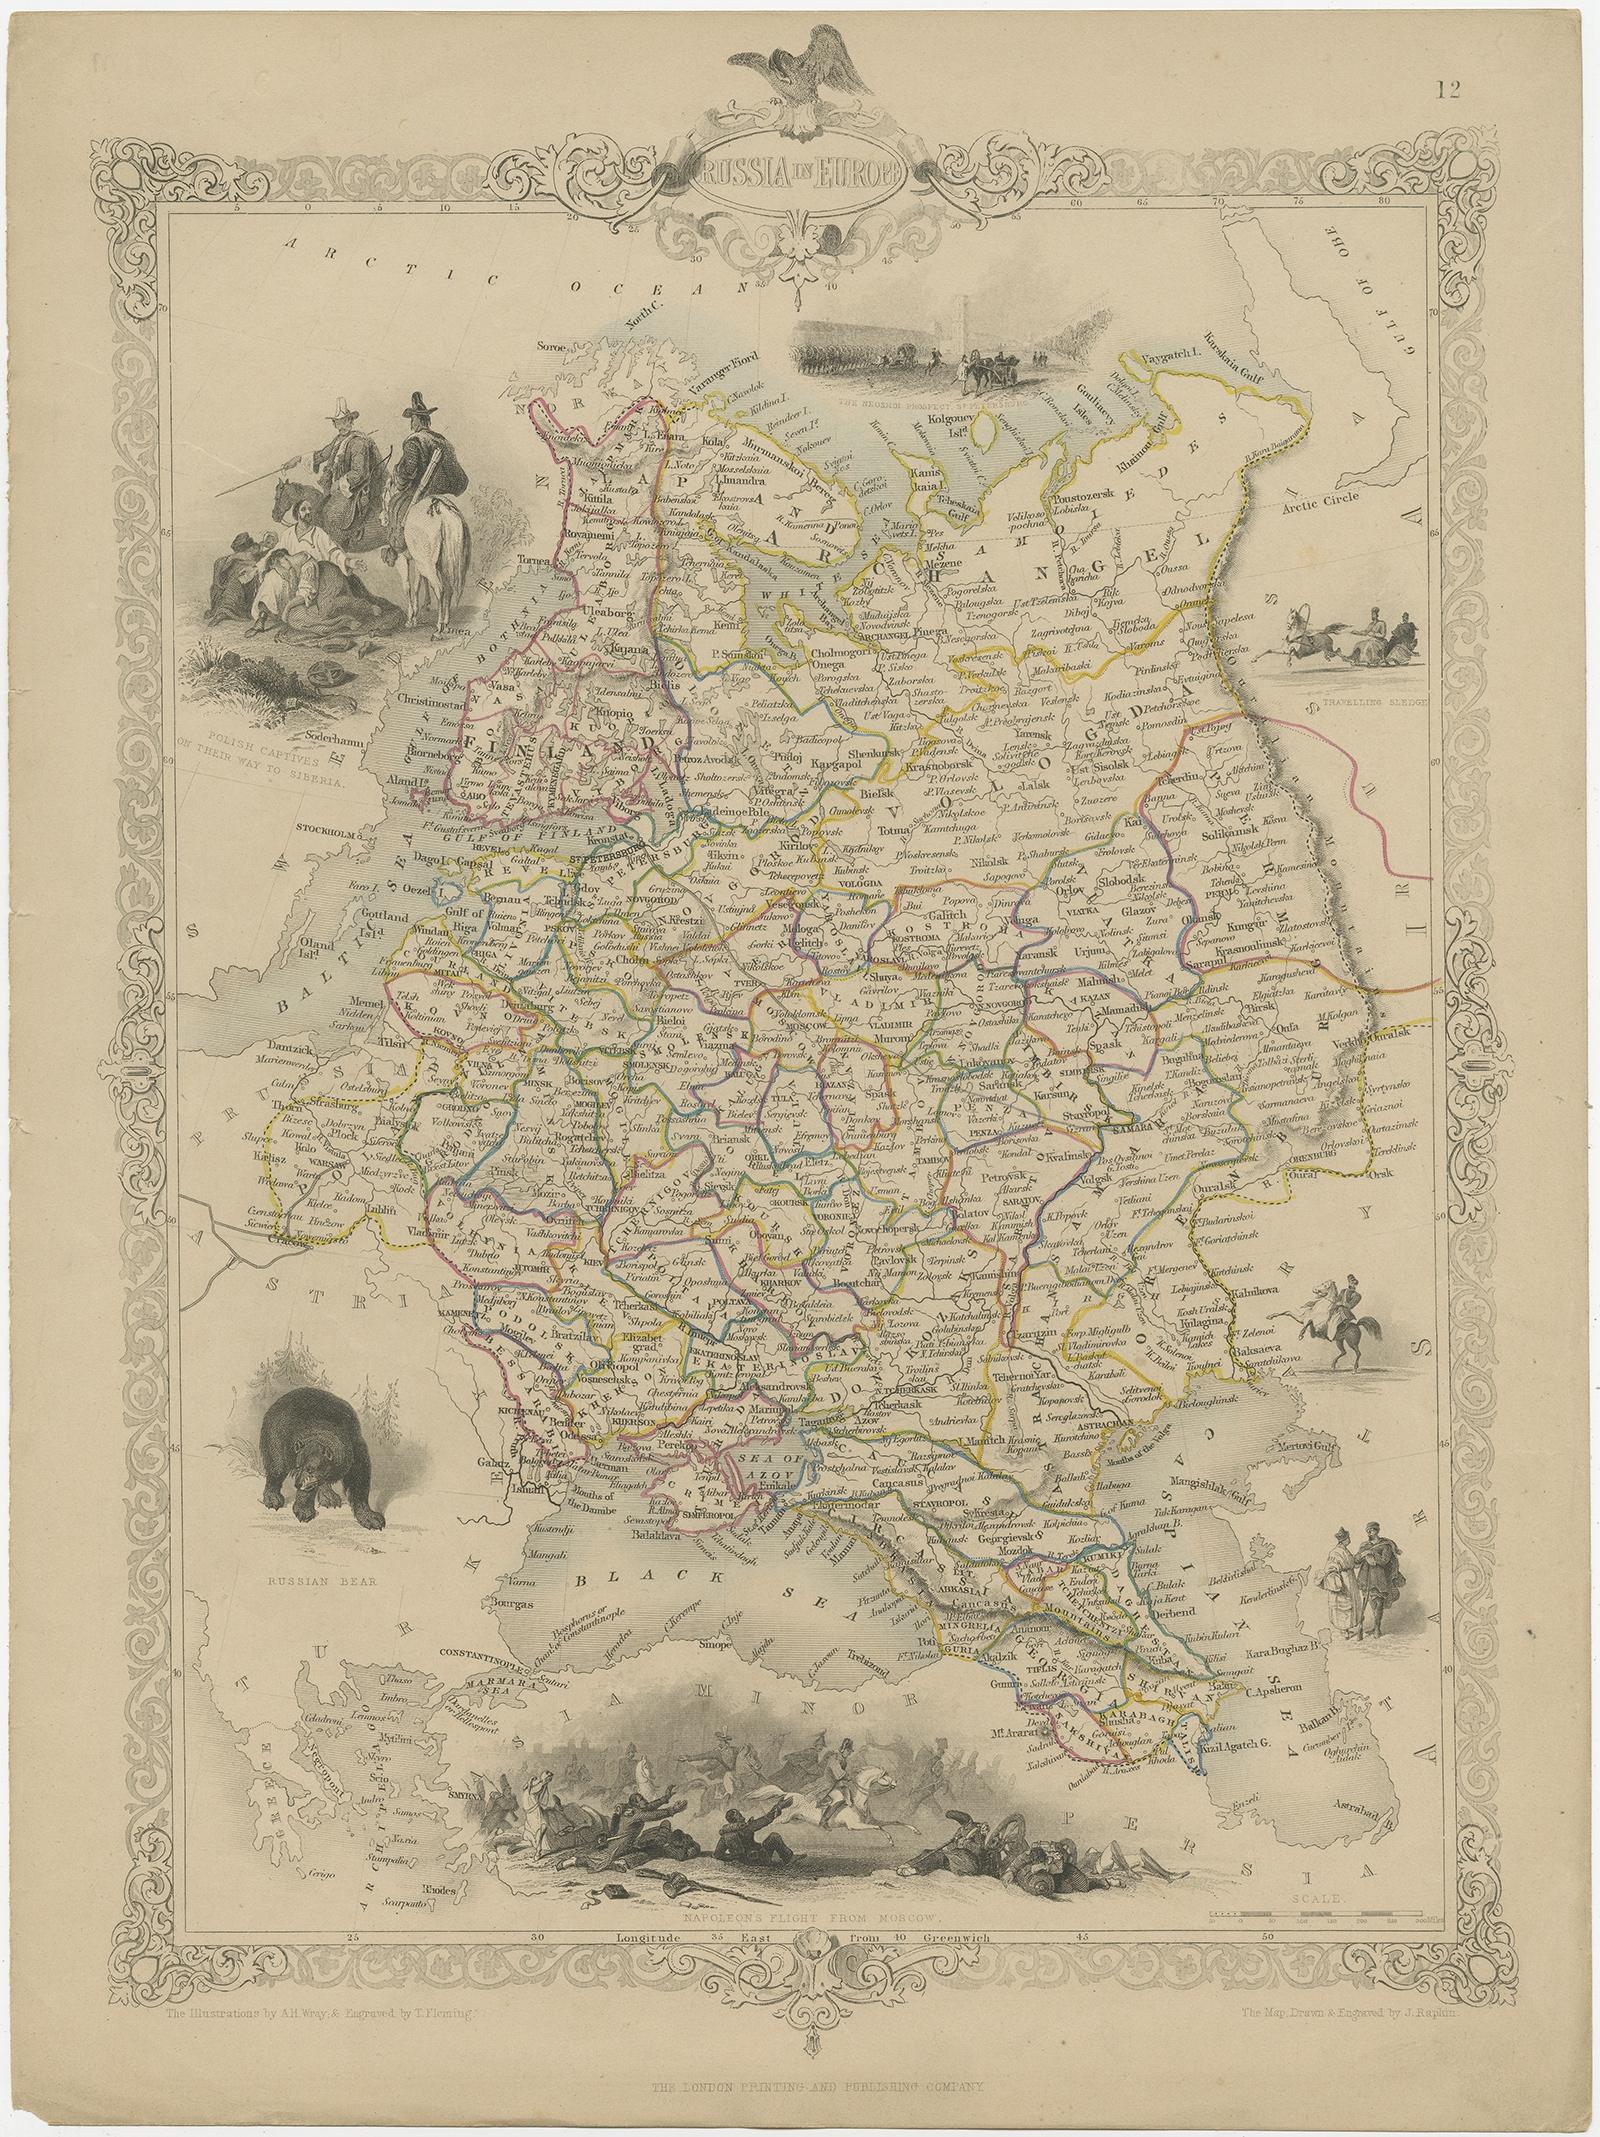 Antique map titled 'Russia in Europe'. 

Map of European Russia. Showing vignettes of the Neoskoi Prospect, St. Petersburg, Polish Captives on their way to Siberia, a Russian Bear, Russian Horseman, Travelling Sledge, costumed Russians, and